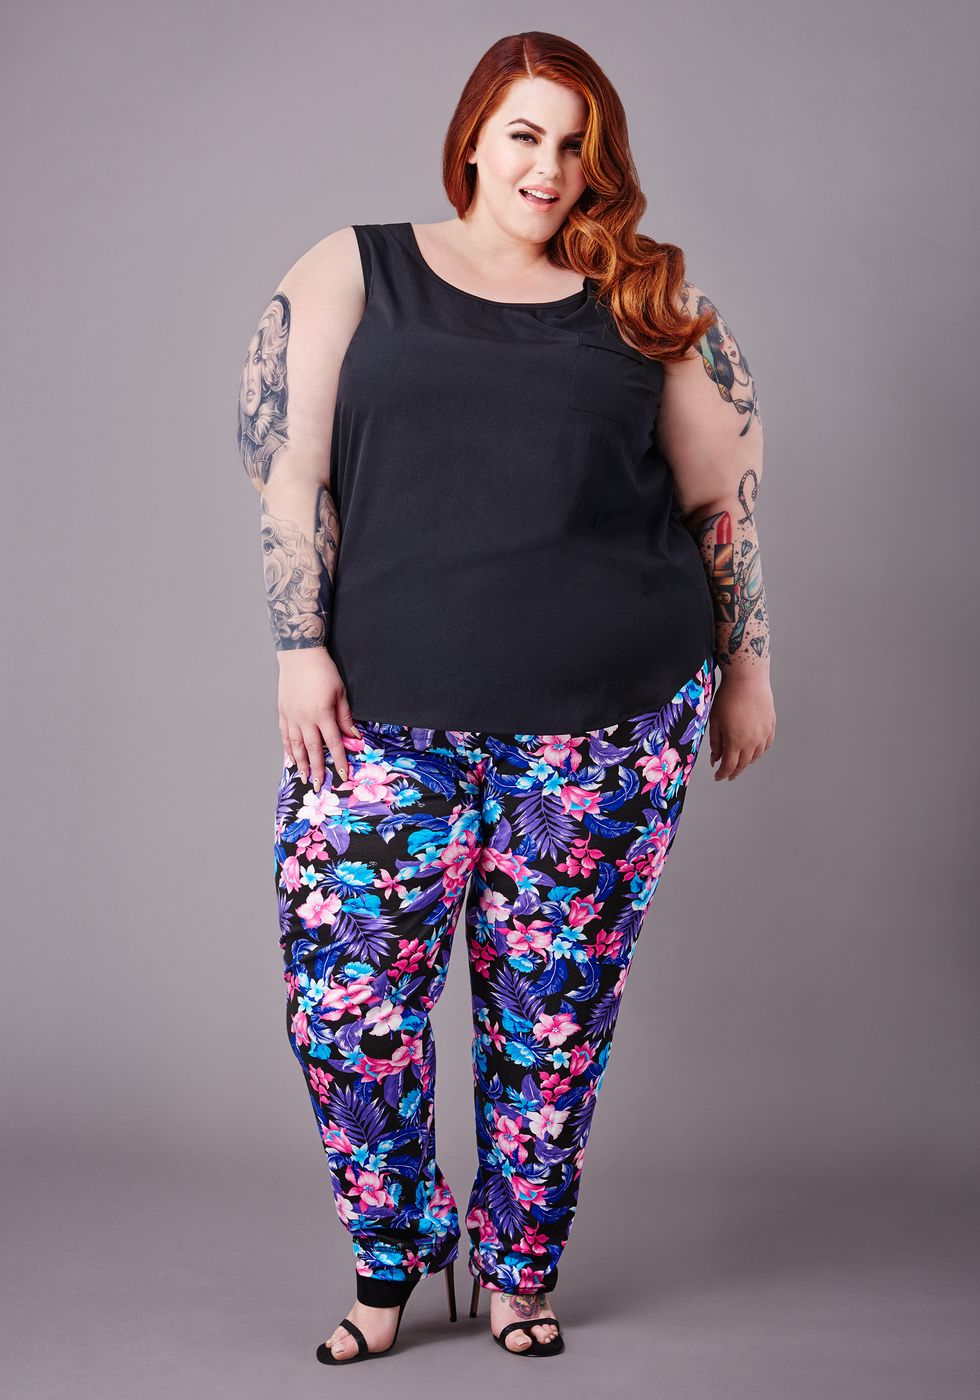 Tess Holliday modelling Yours Clothing's SS15 range